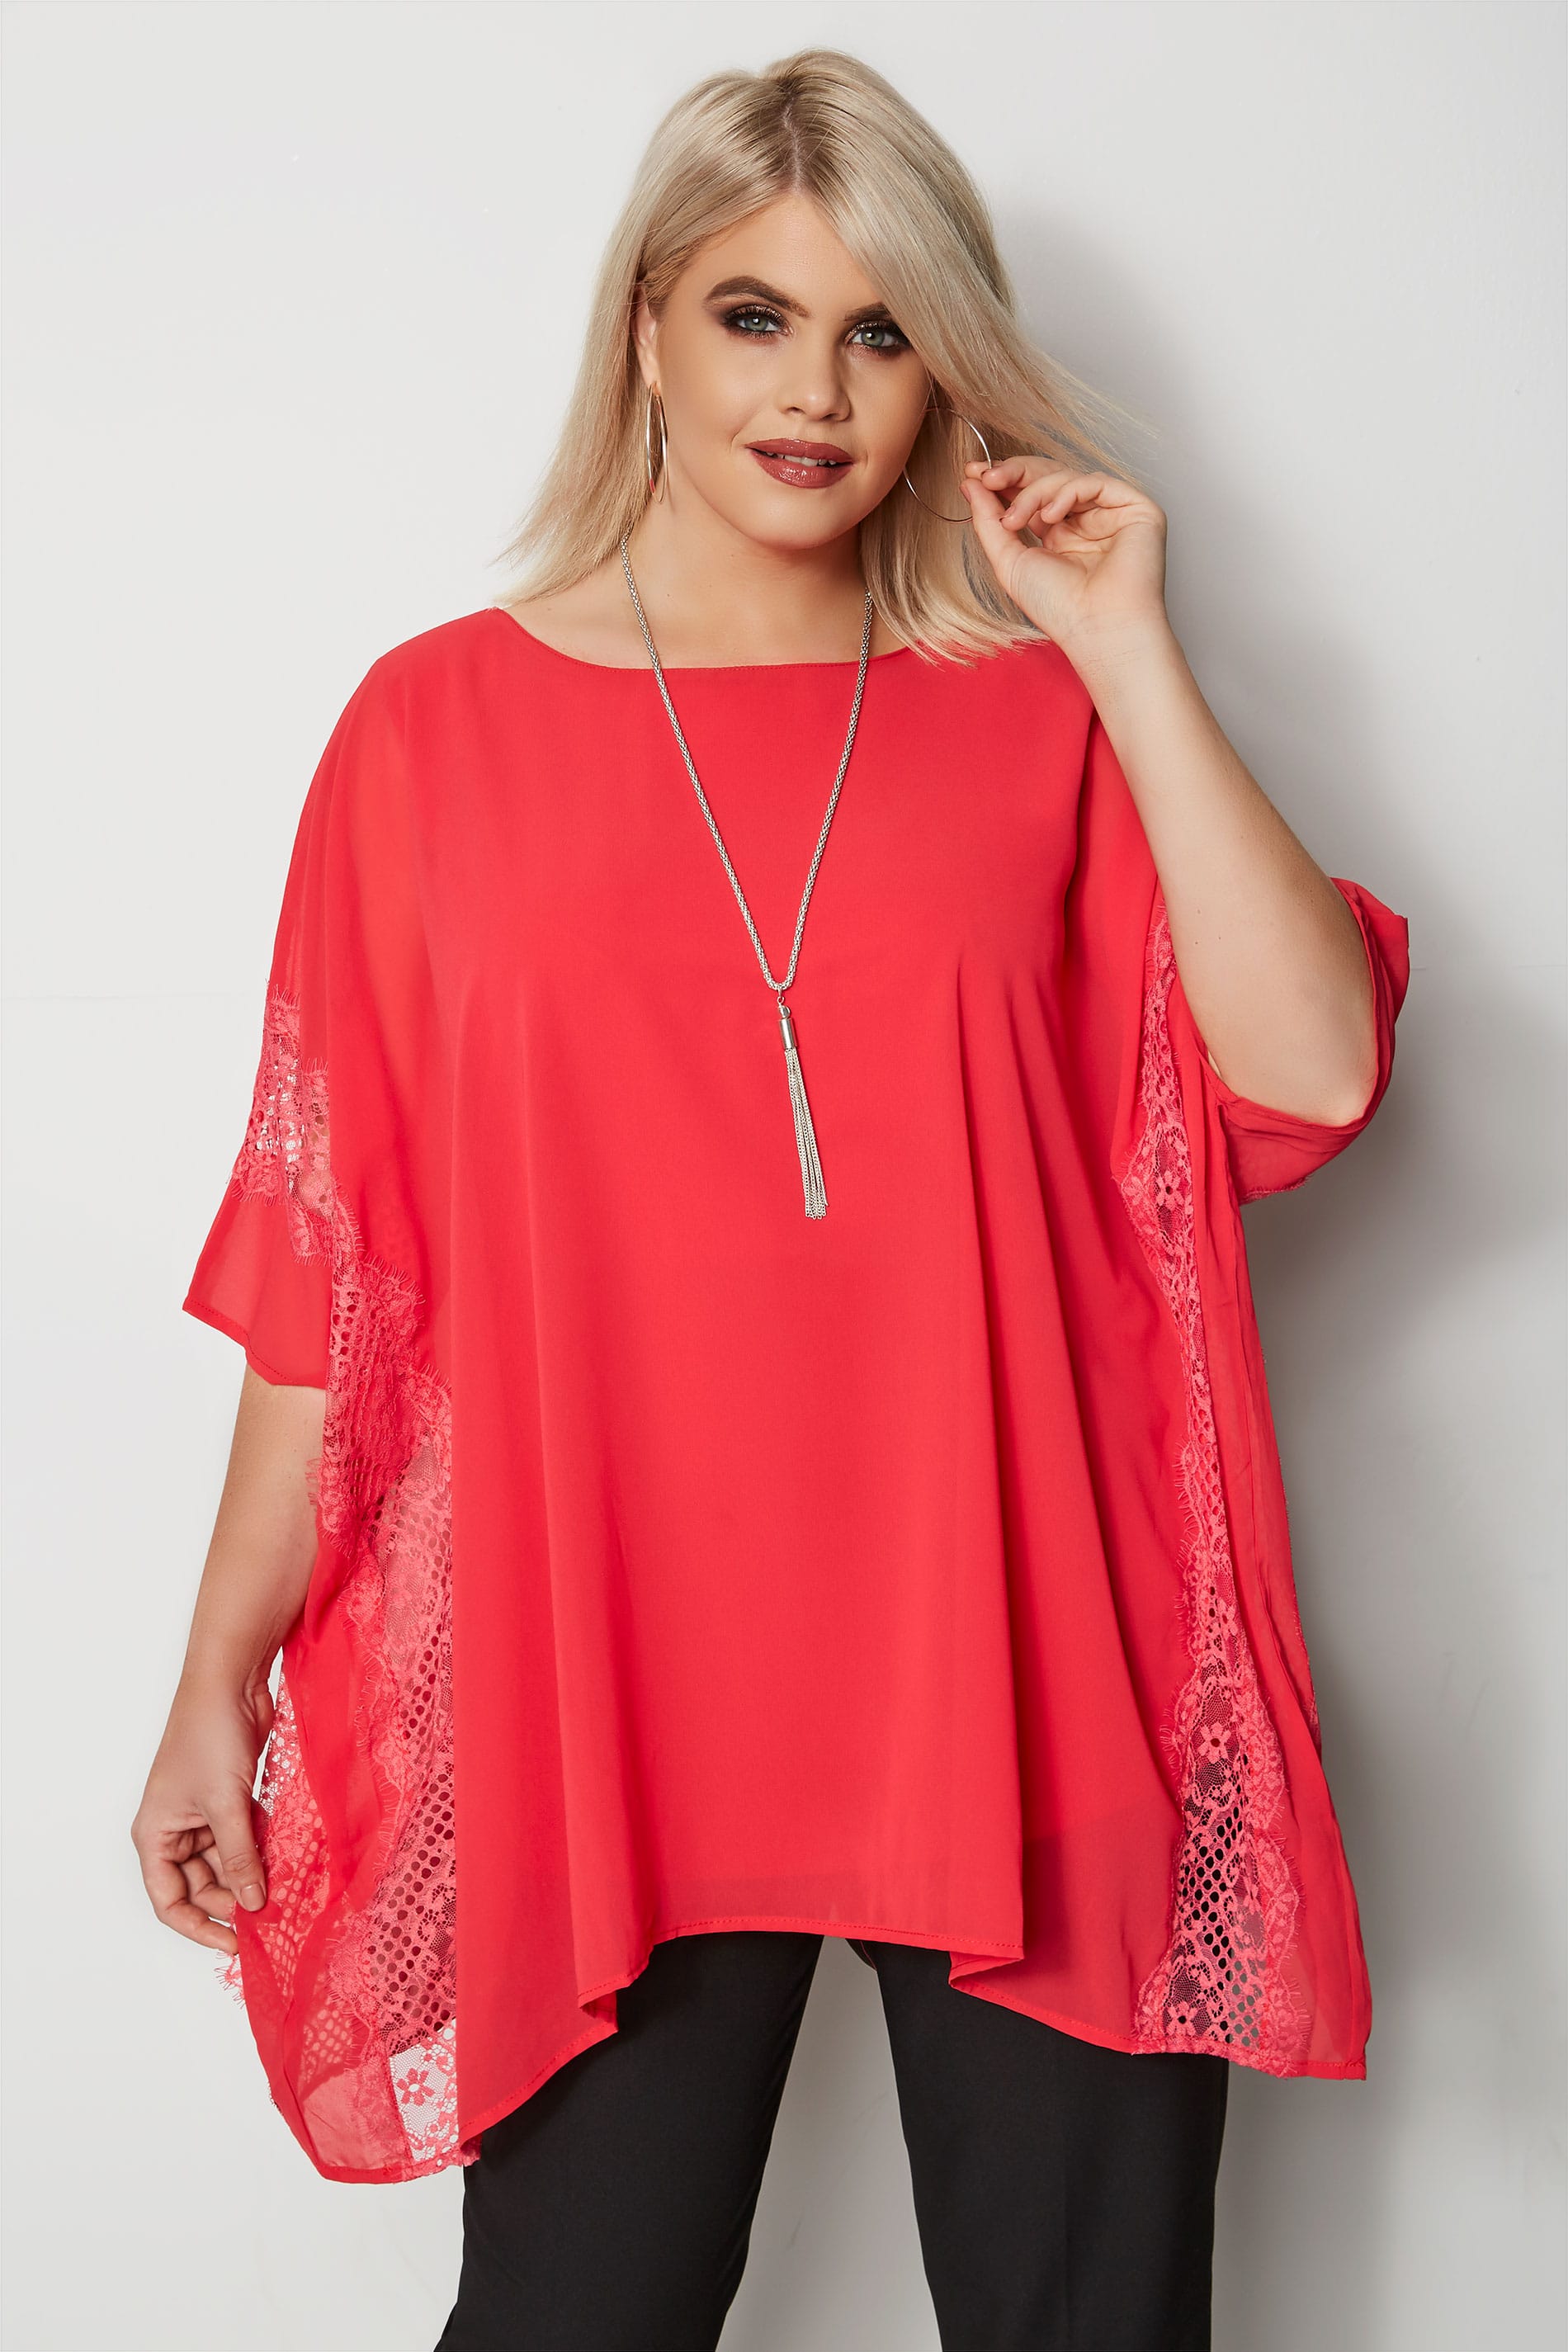 YOURS LONDON Red Chiffon Cape Top, Plus size 16 to 32